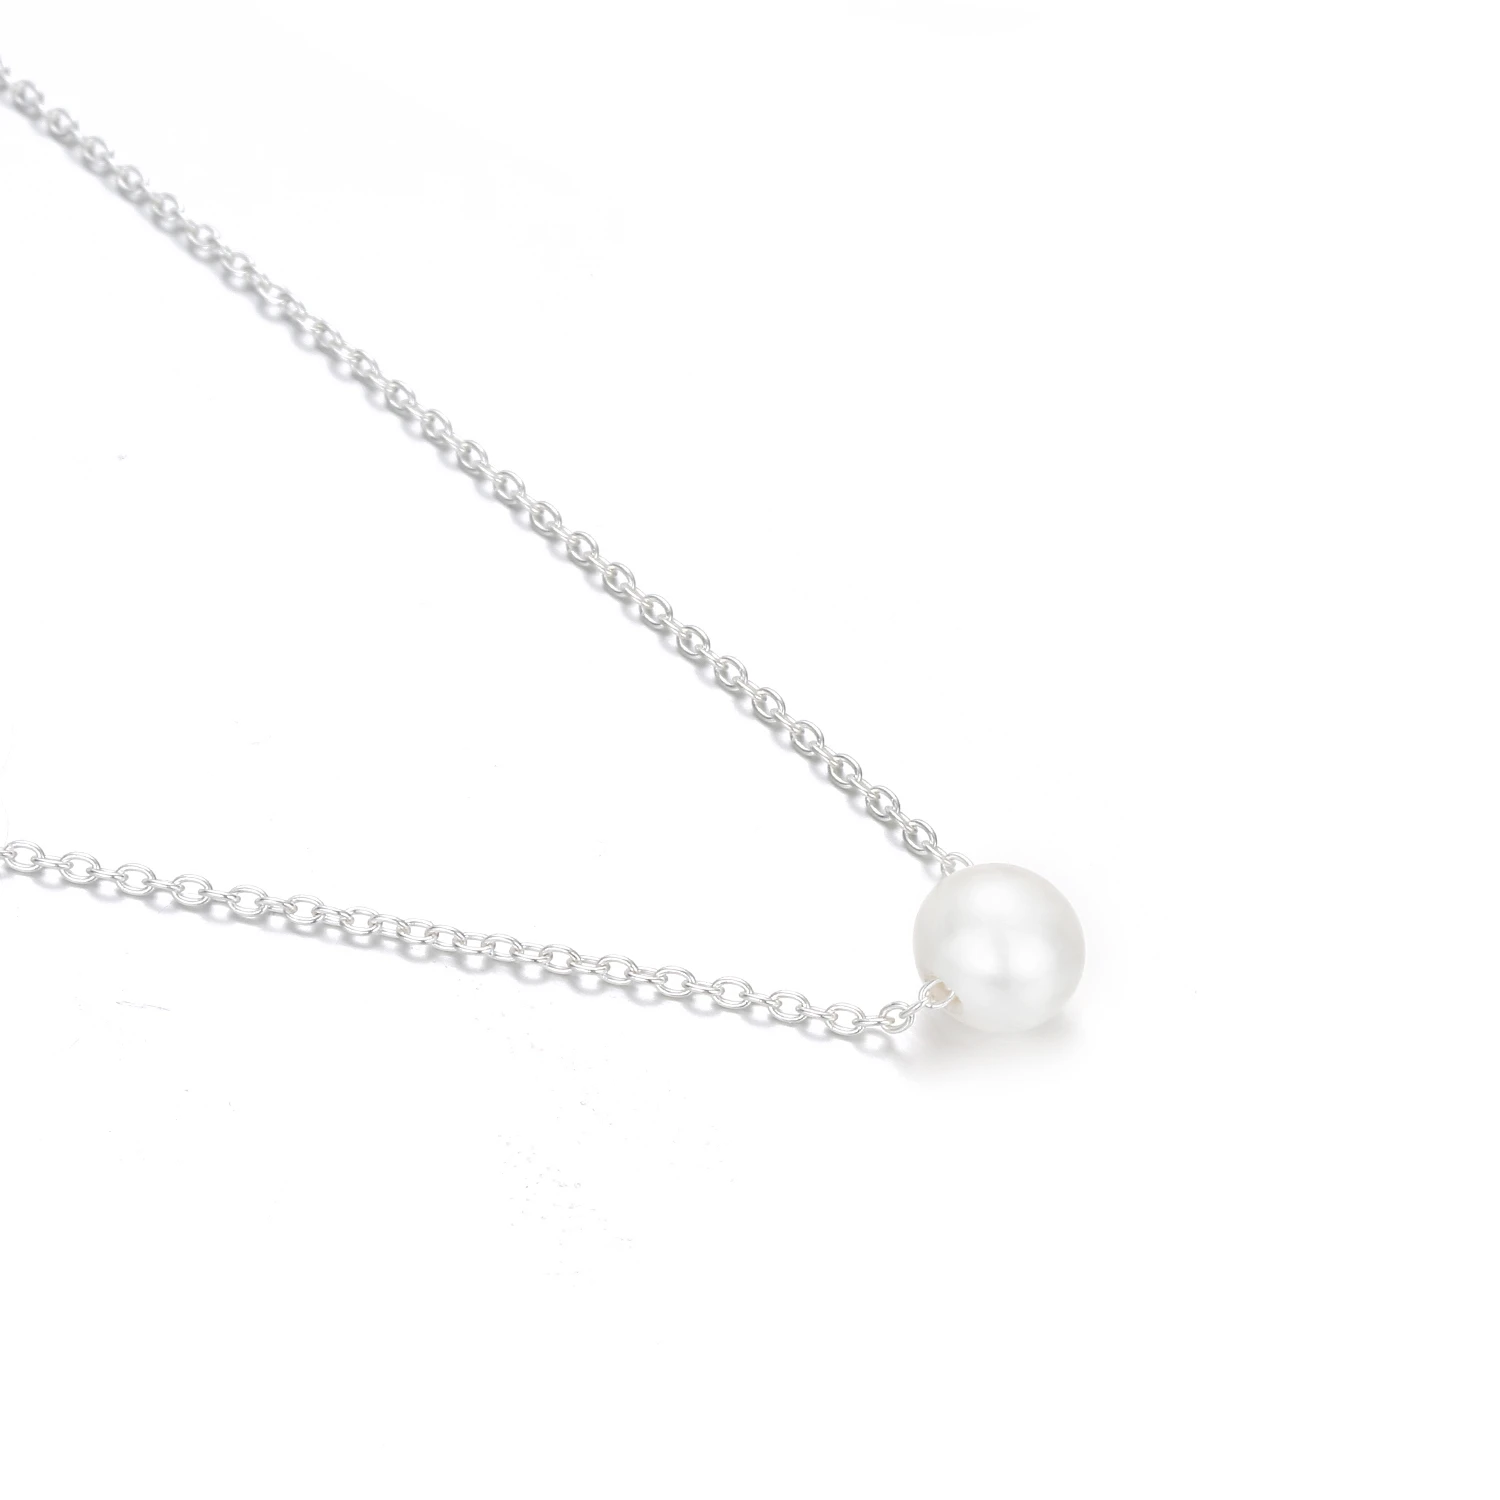 Professional Supplier New Designs Fashion Jewelry Gold Stainless Steel Imitation Pearl Choker Pendant Necklaces